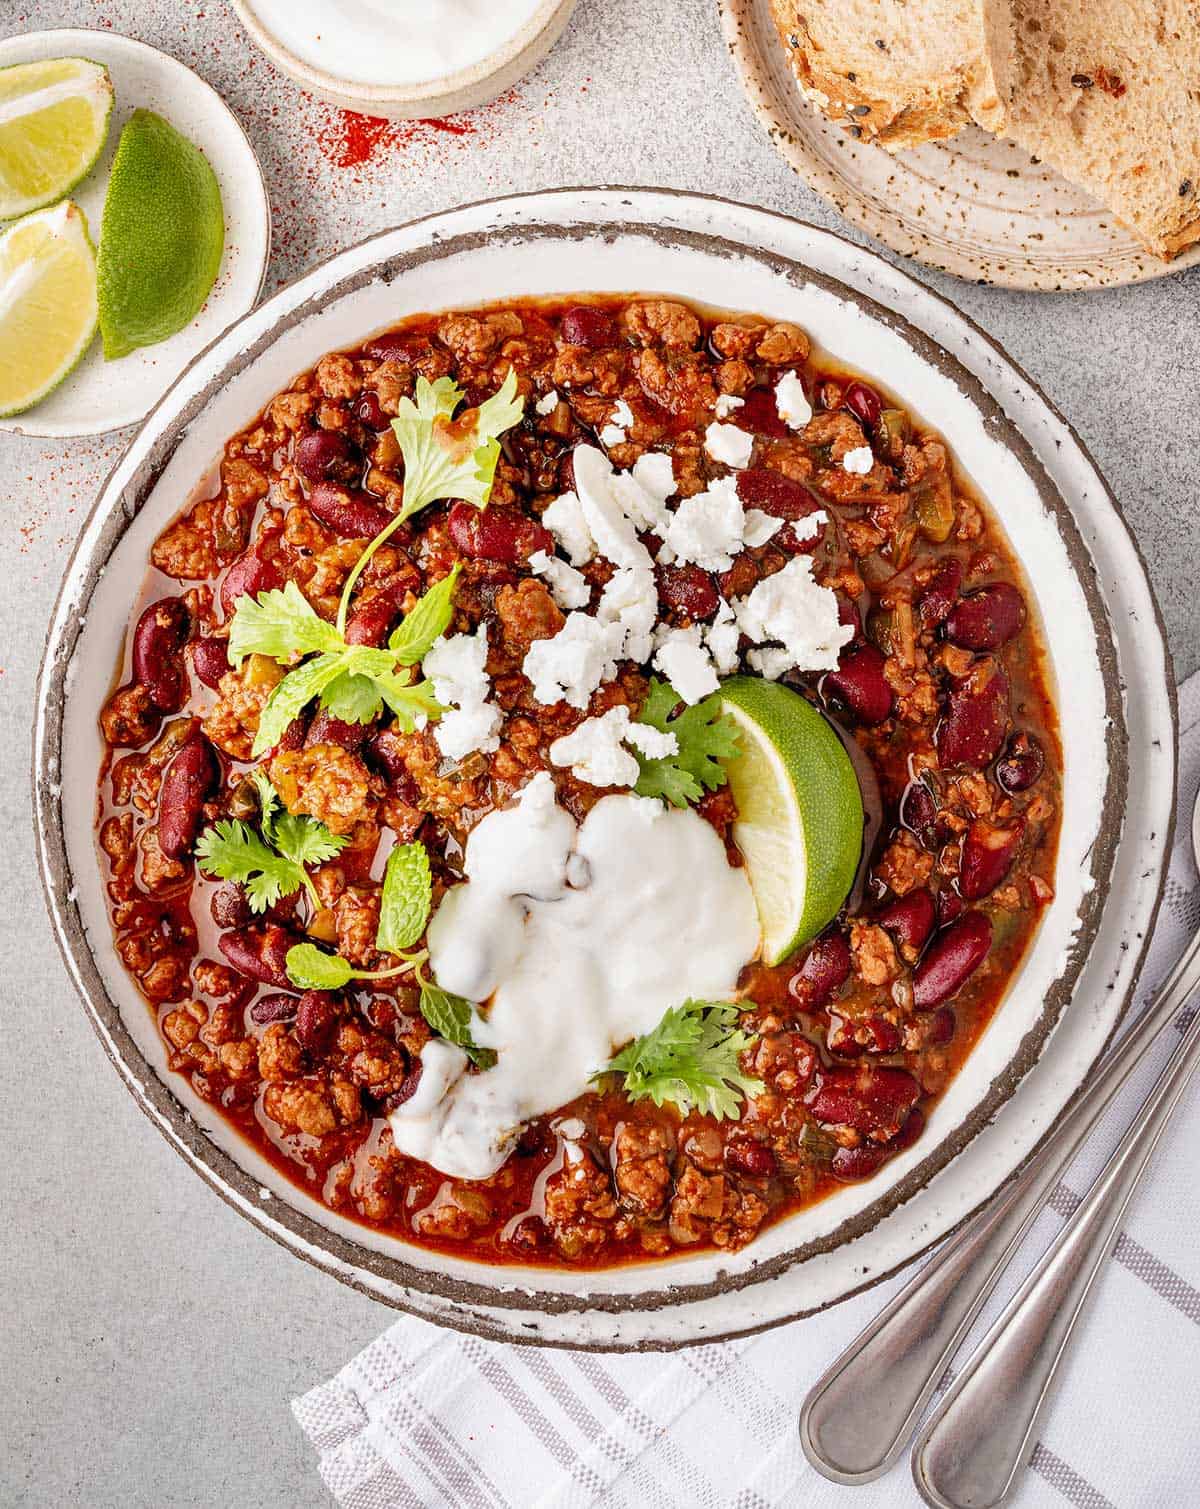 A bowl of homemade lamb chili with plenty of toppings.